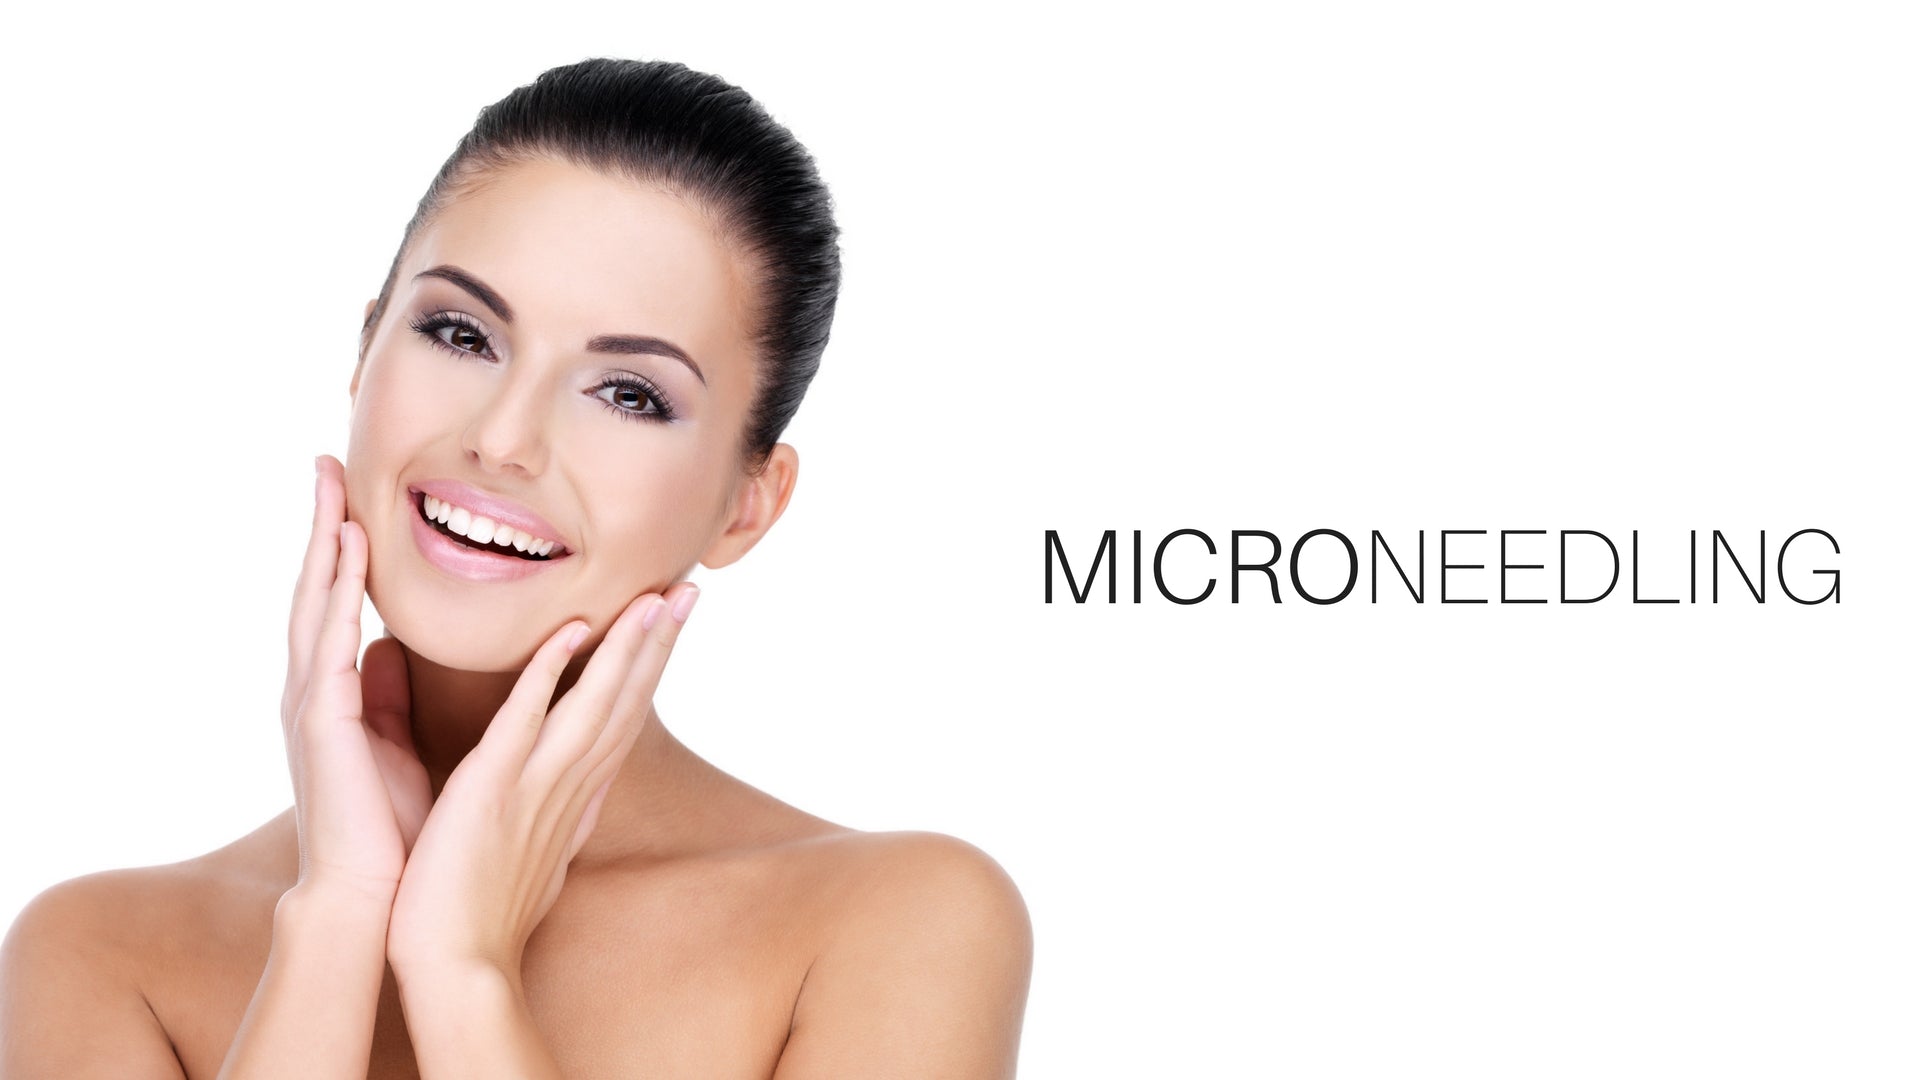 All you need to know about Microneedling